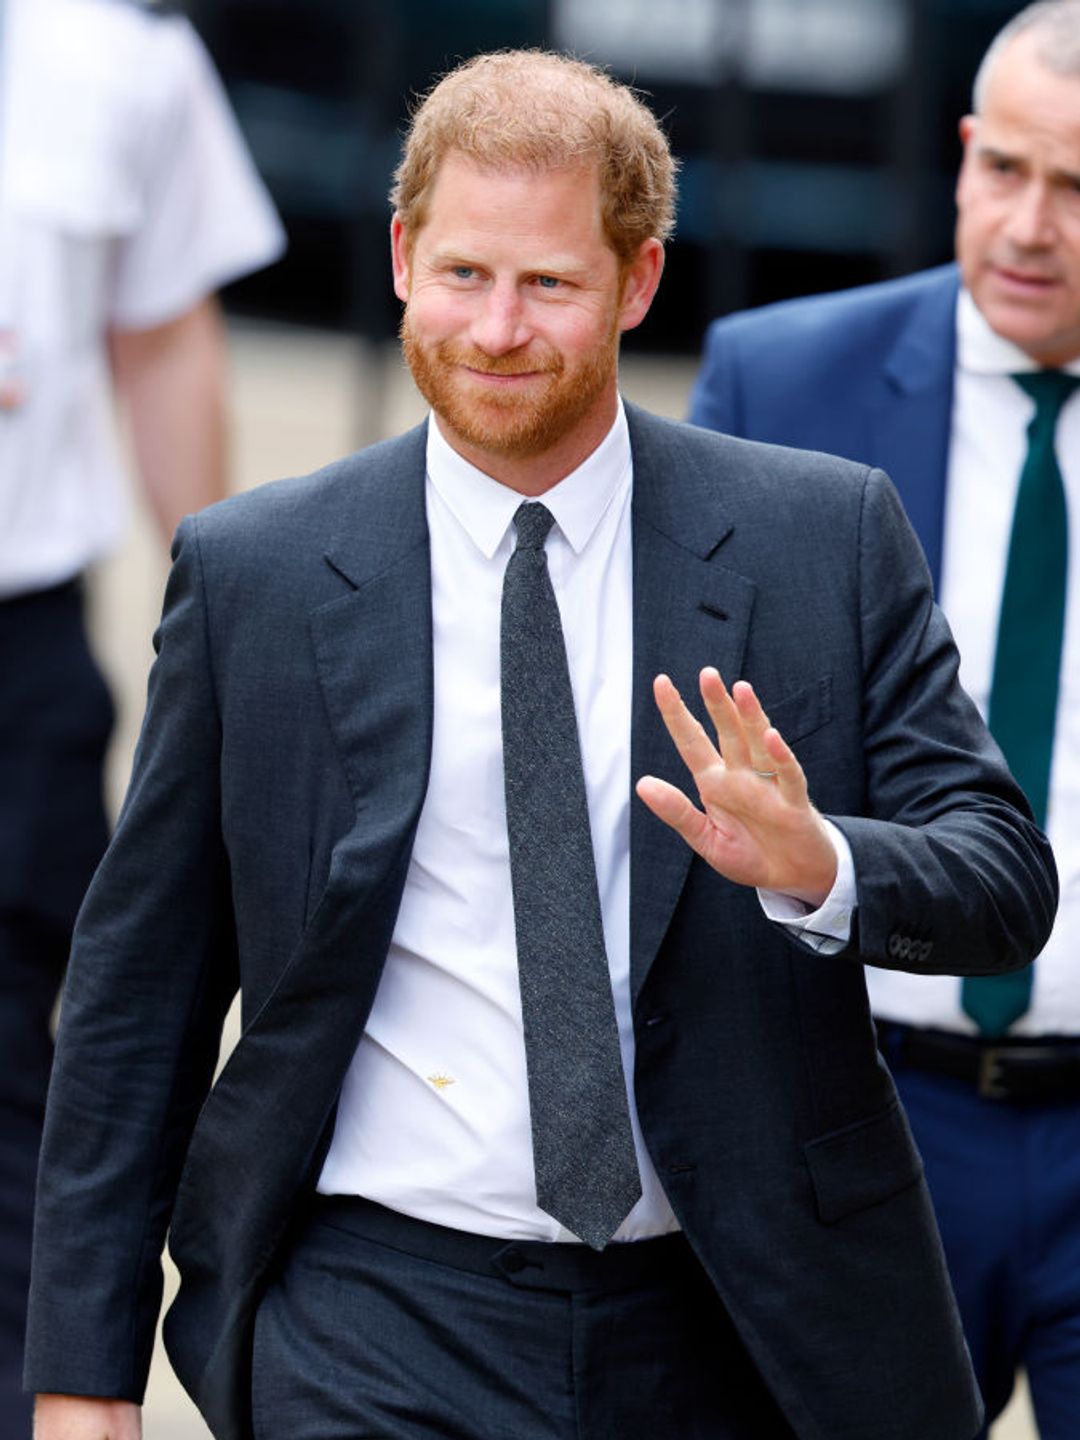 The Duke of Sussex arrives at the Royal Courts of Justice on March 30, 2023